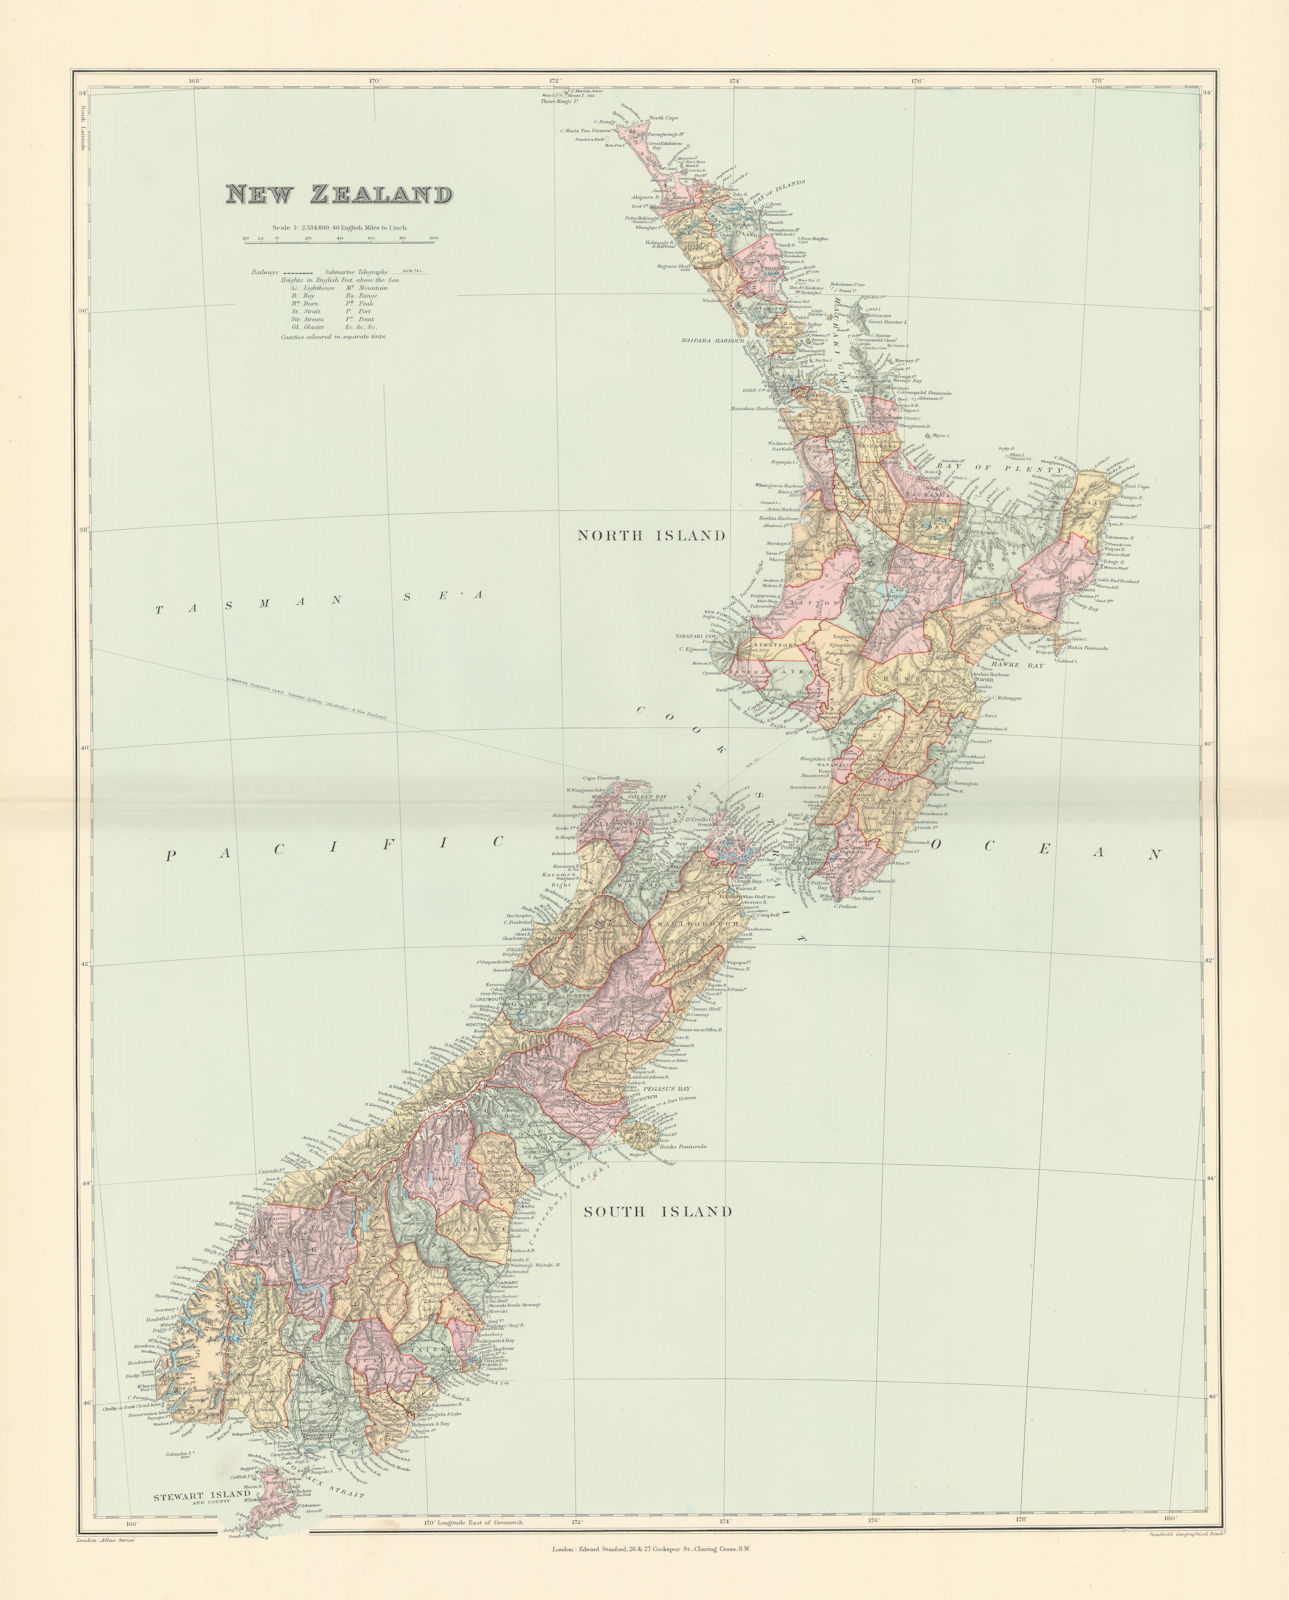 Associate Product New Zealand. Counties. Railways. Large 64x50cm. STANFORD 1896 old antique map